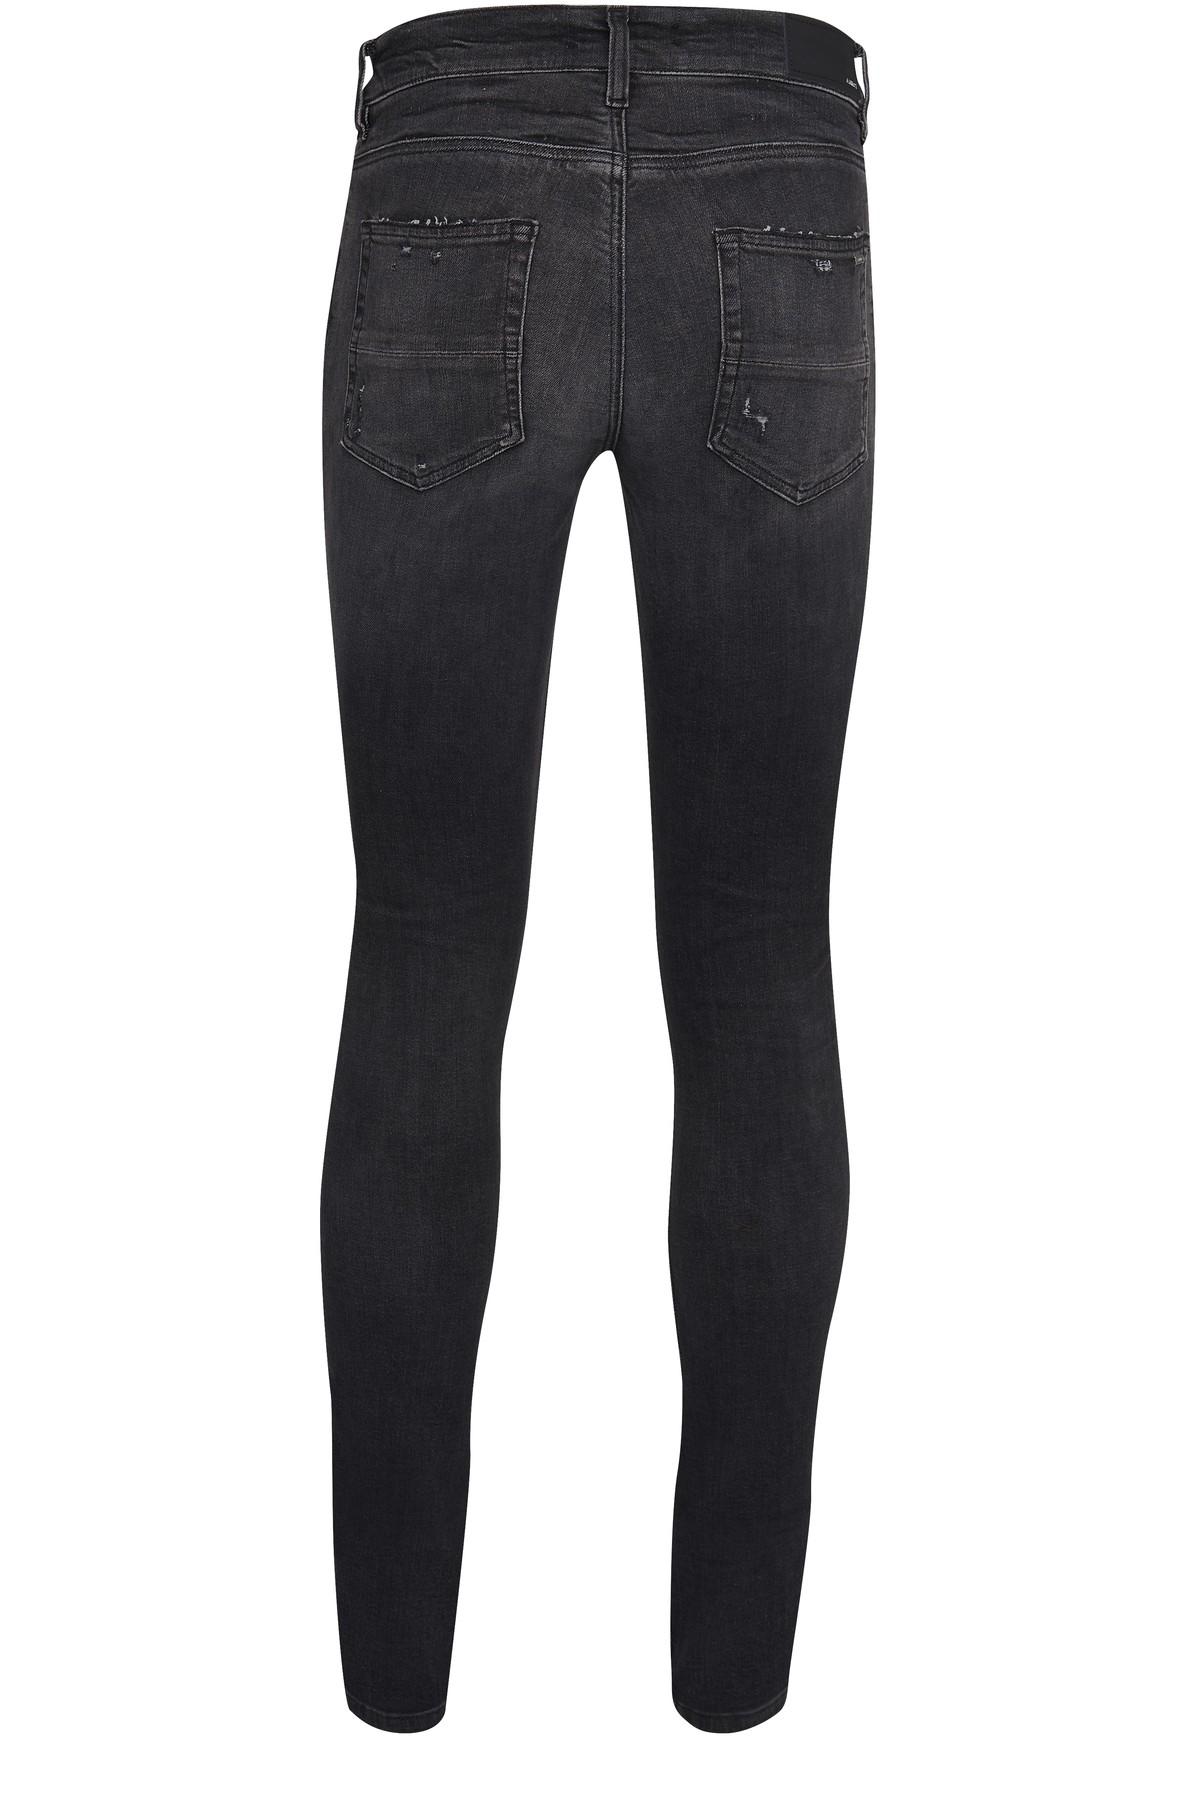 Amiri Grey Stack Jeans in Gray for Men | Lyst